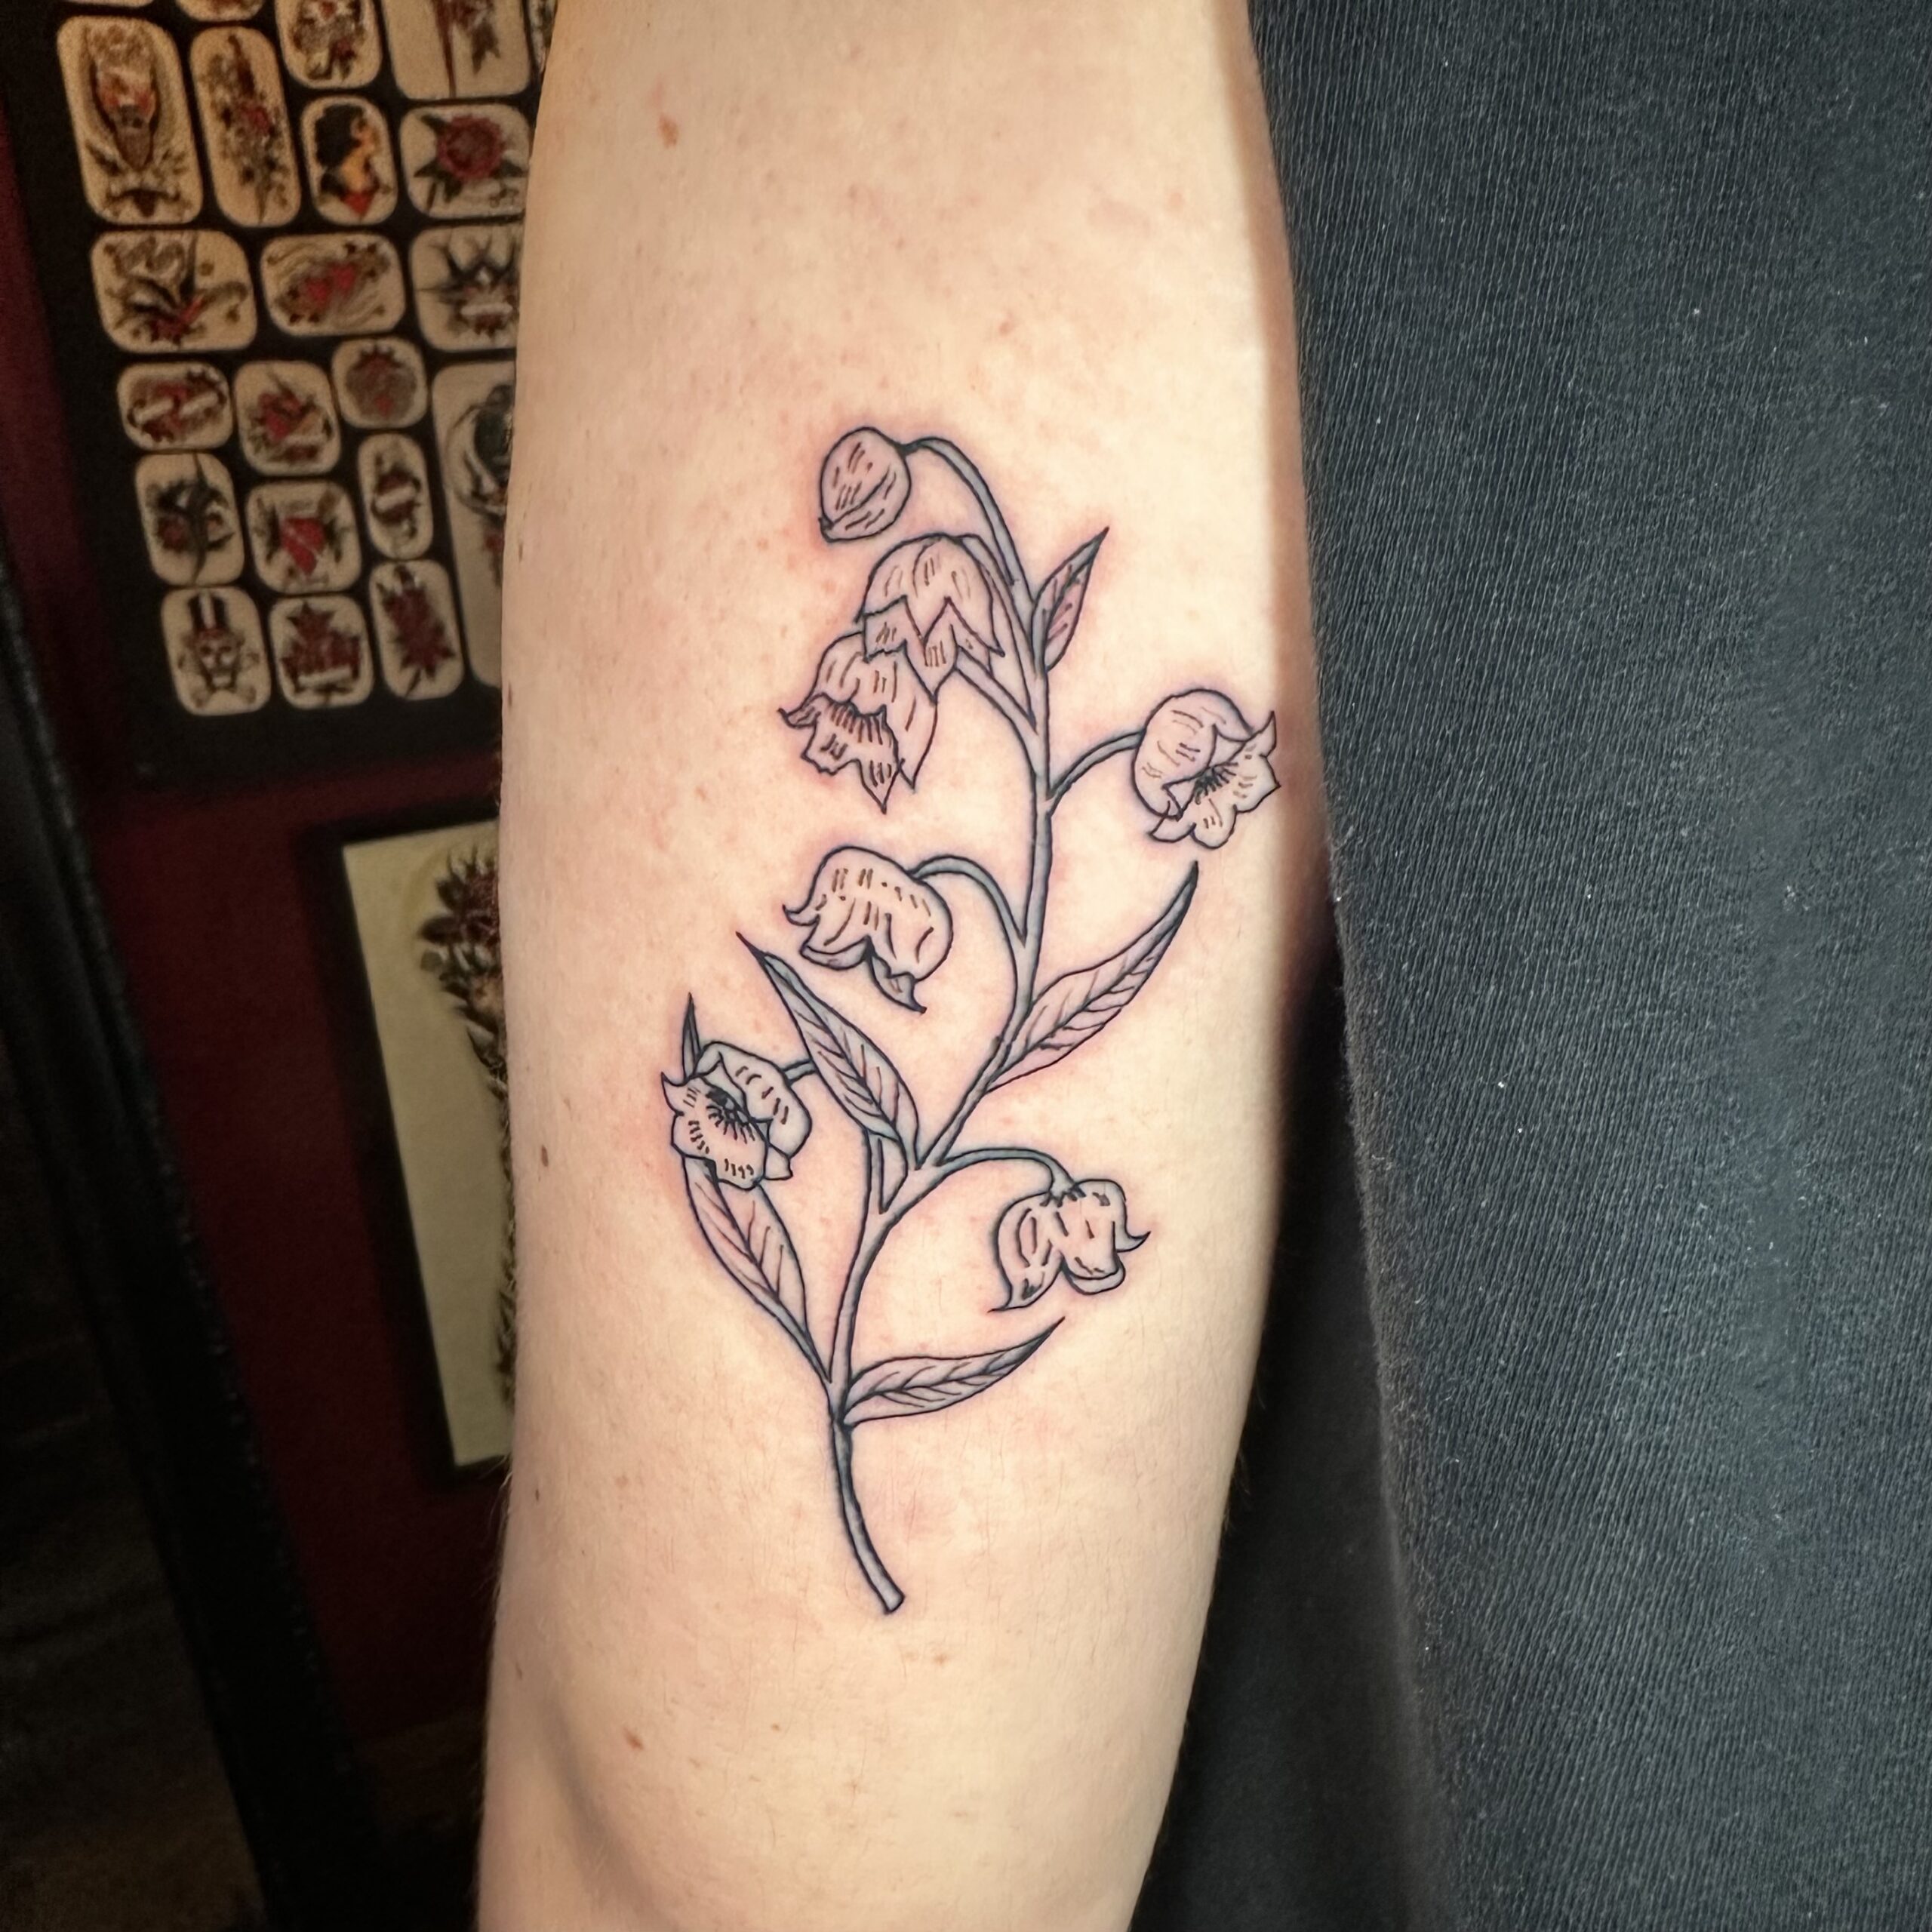 Tattoo of a flower from Dallas tattoo parlor